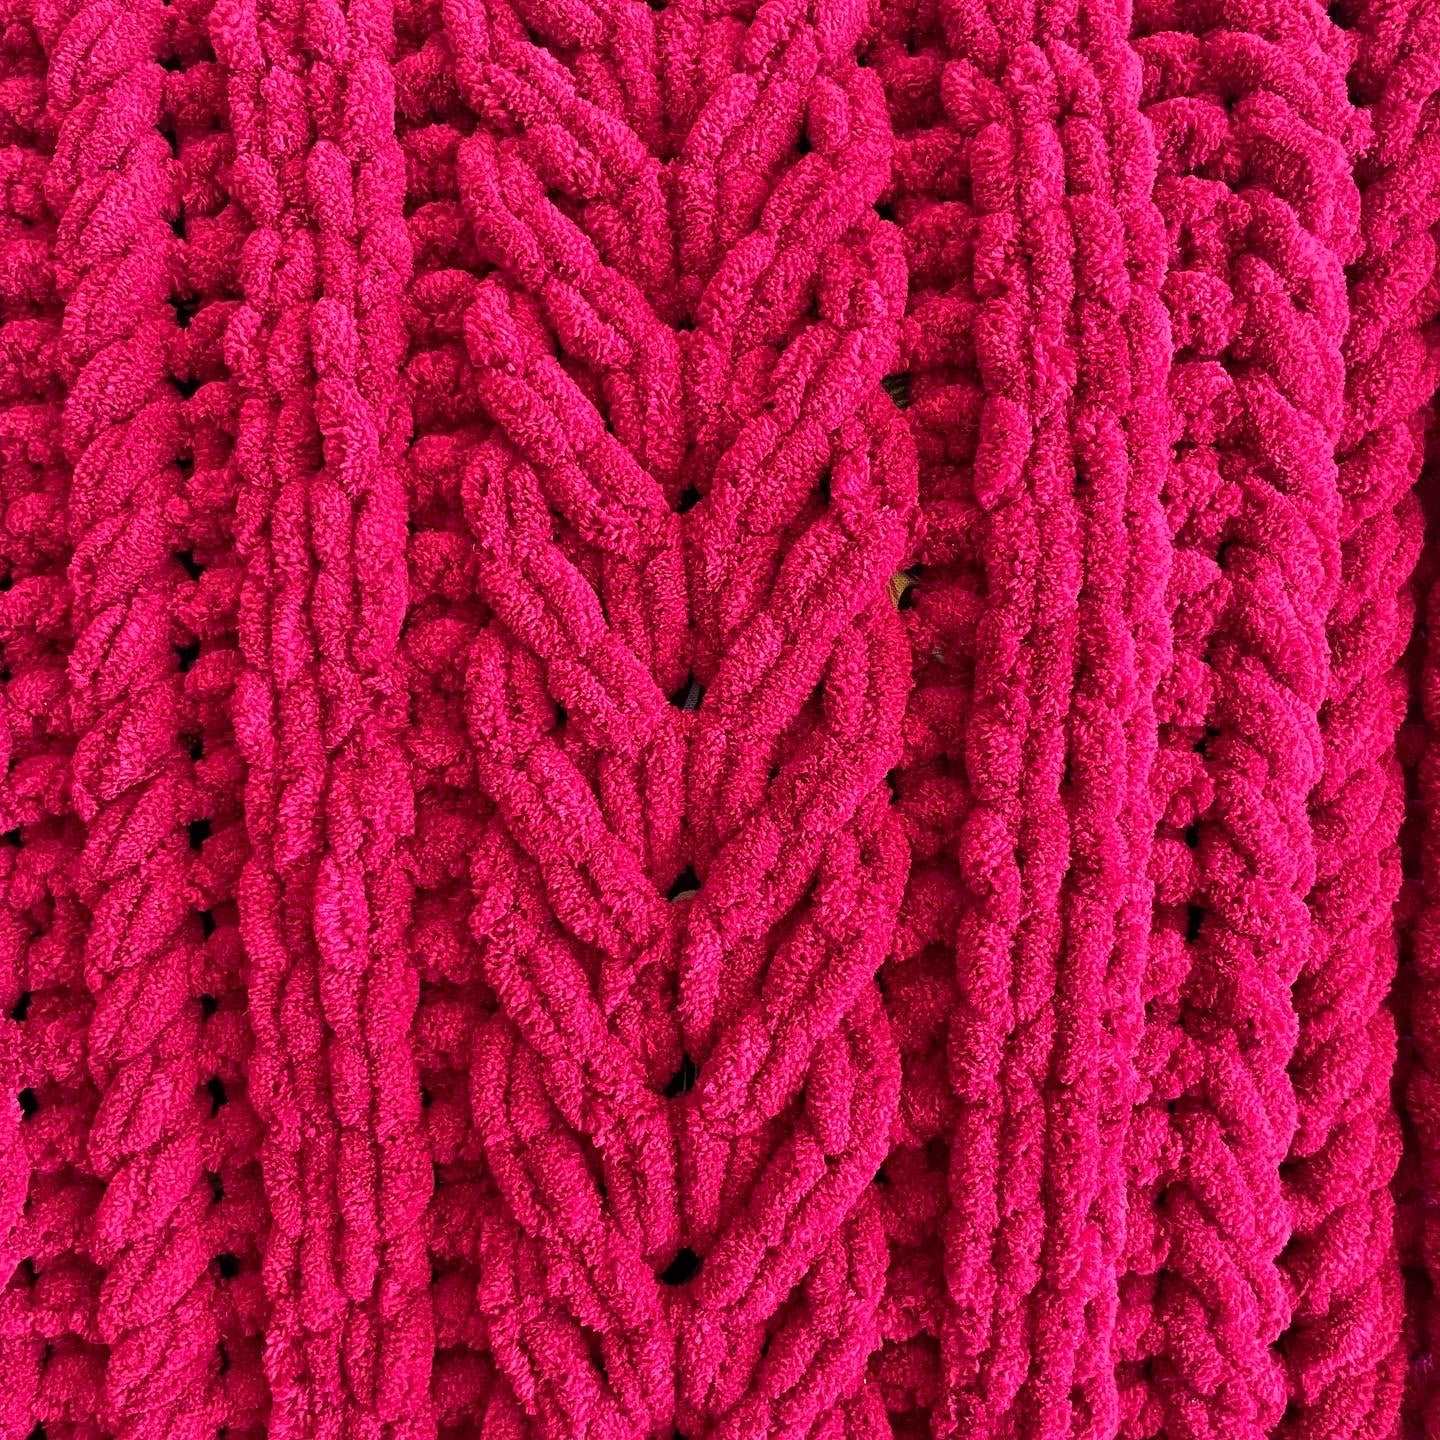 PATTERN: Entwined Staghorn Cable Blanket - ILoveMyBlanket